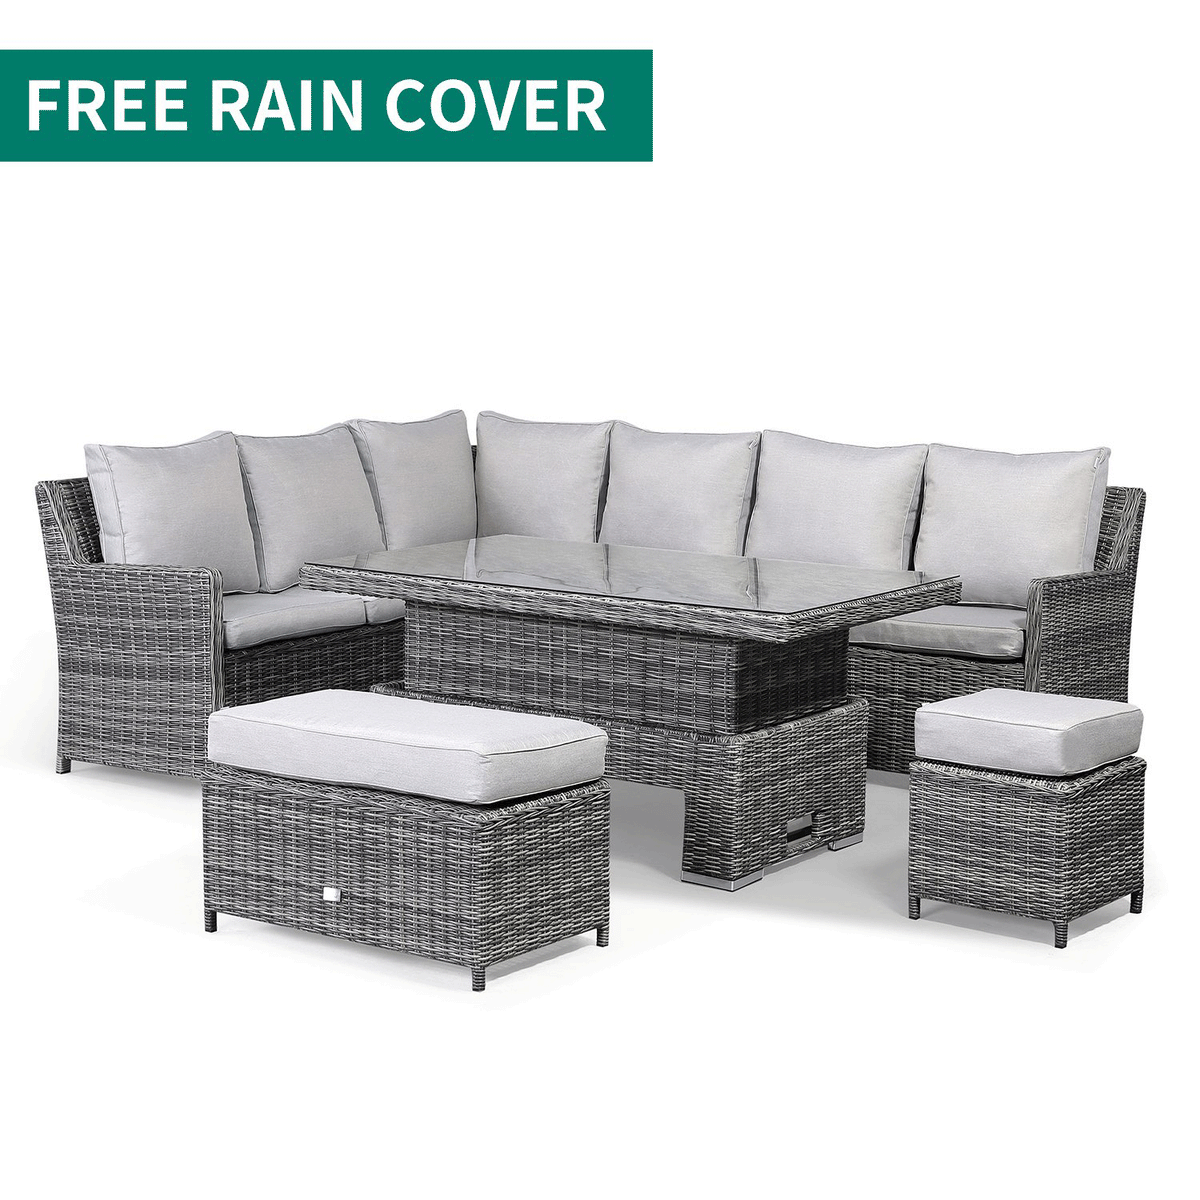 Rattan Park Oxford High Back Large Modular Corner Sofa Set  with Rising Table in Half Round Grey weave